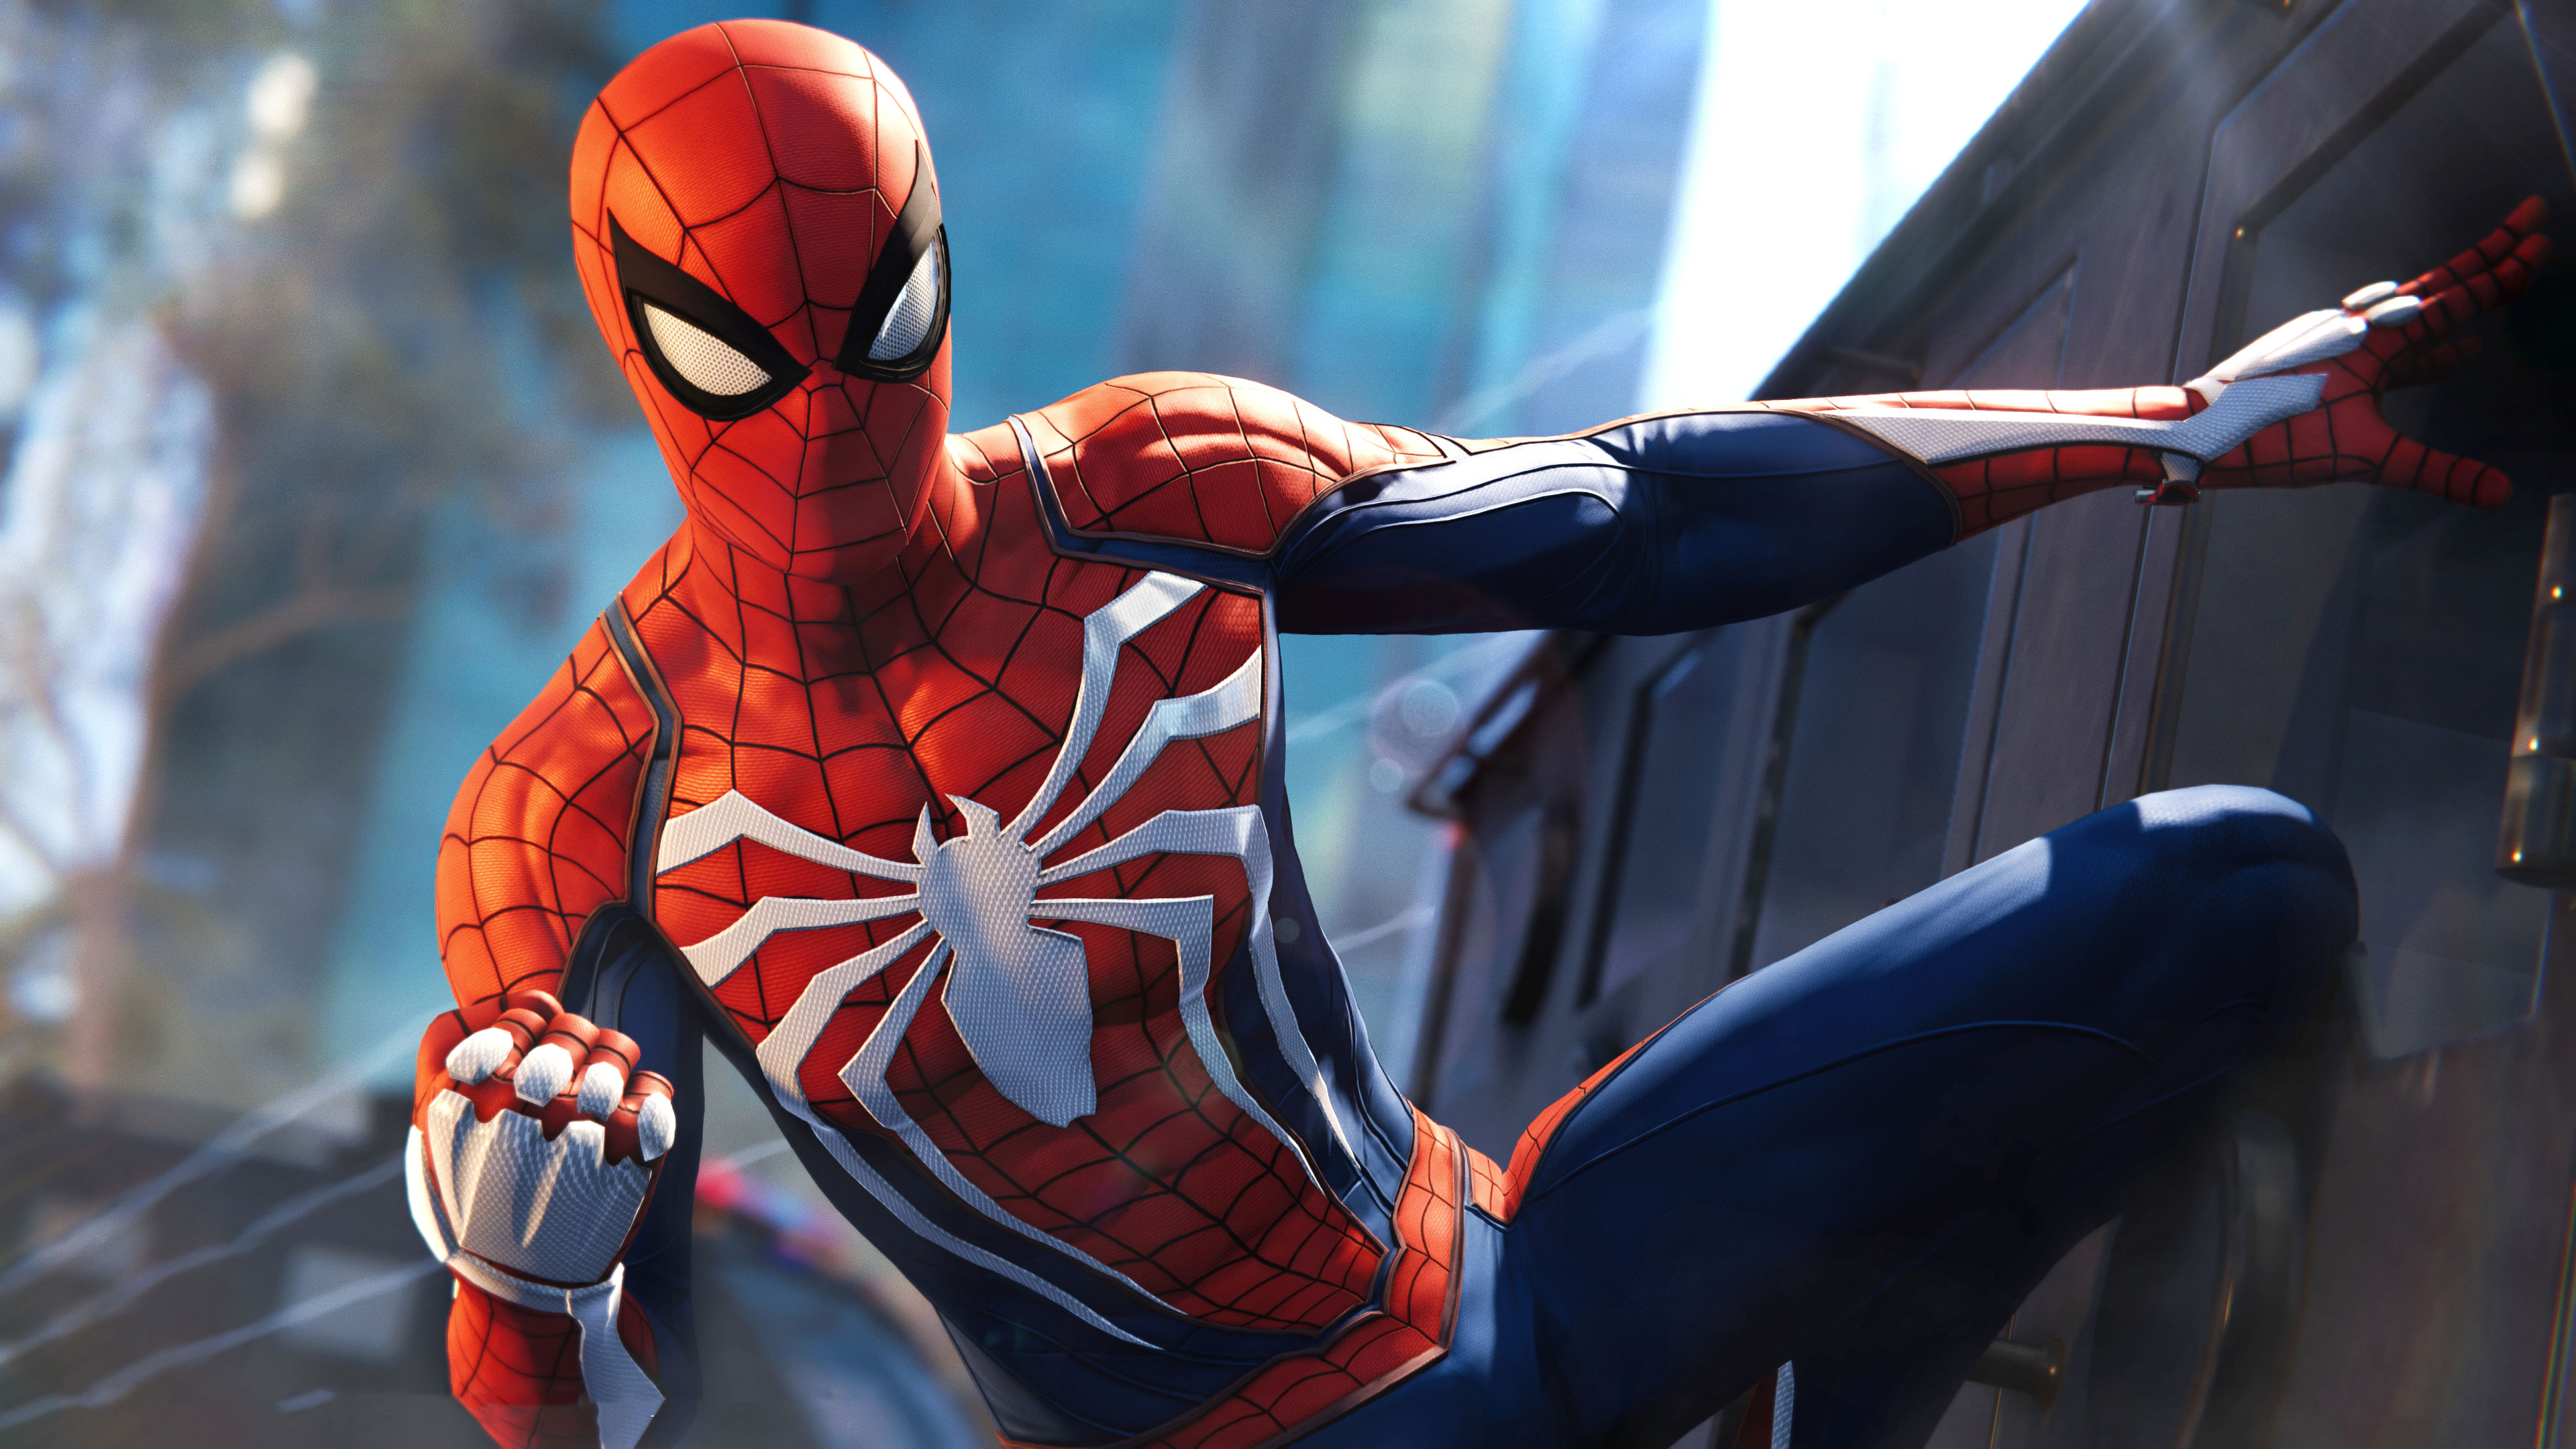 Free Marvel's SpiderMan PS4 Theme Available to Download